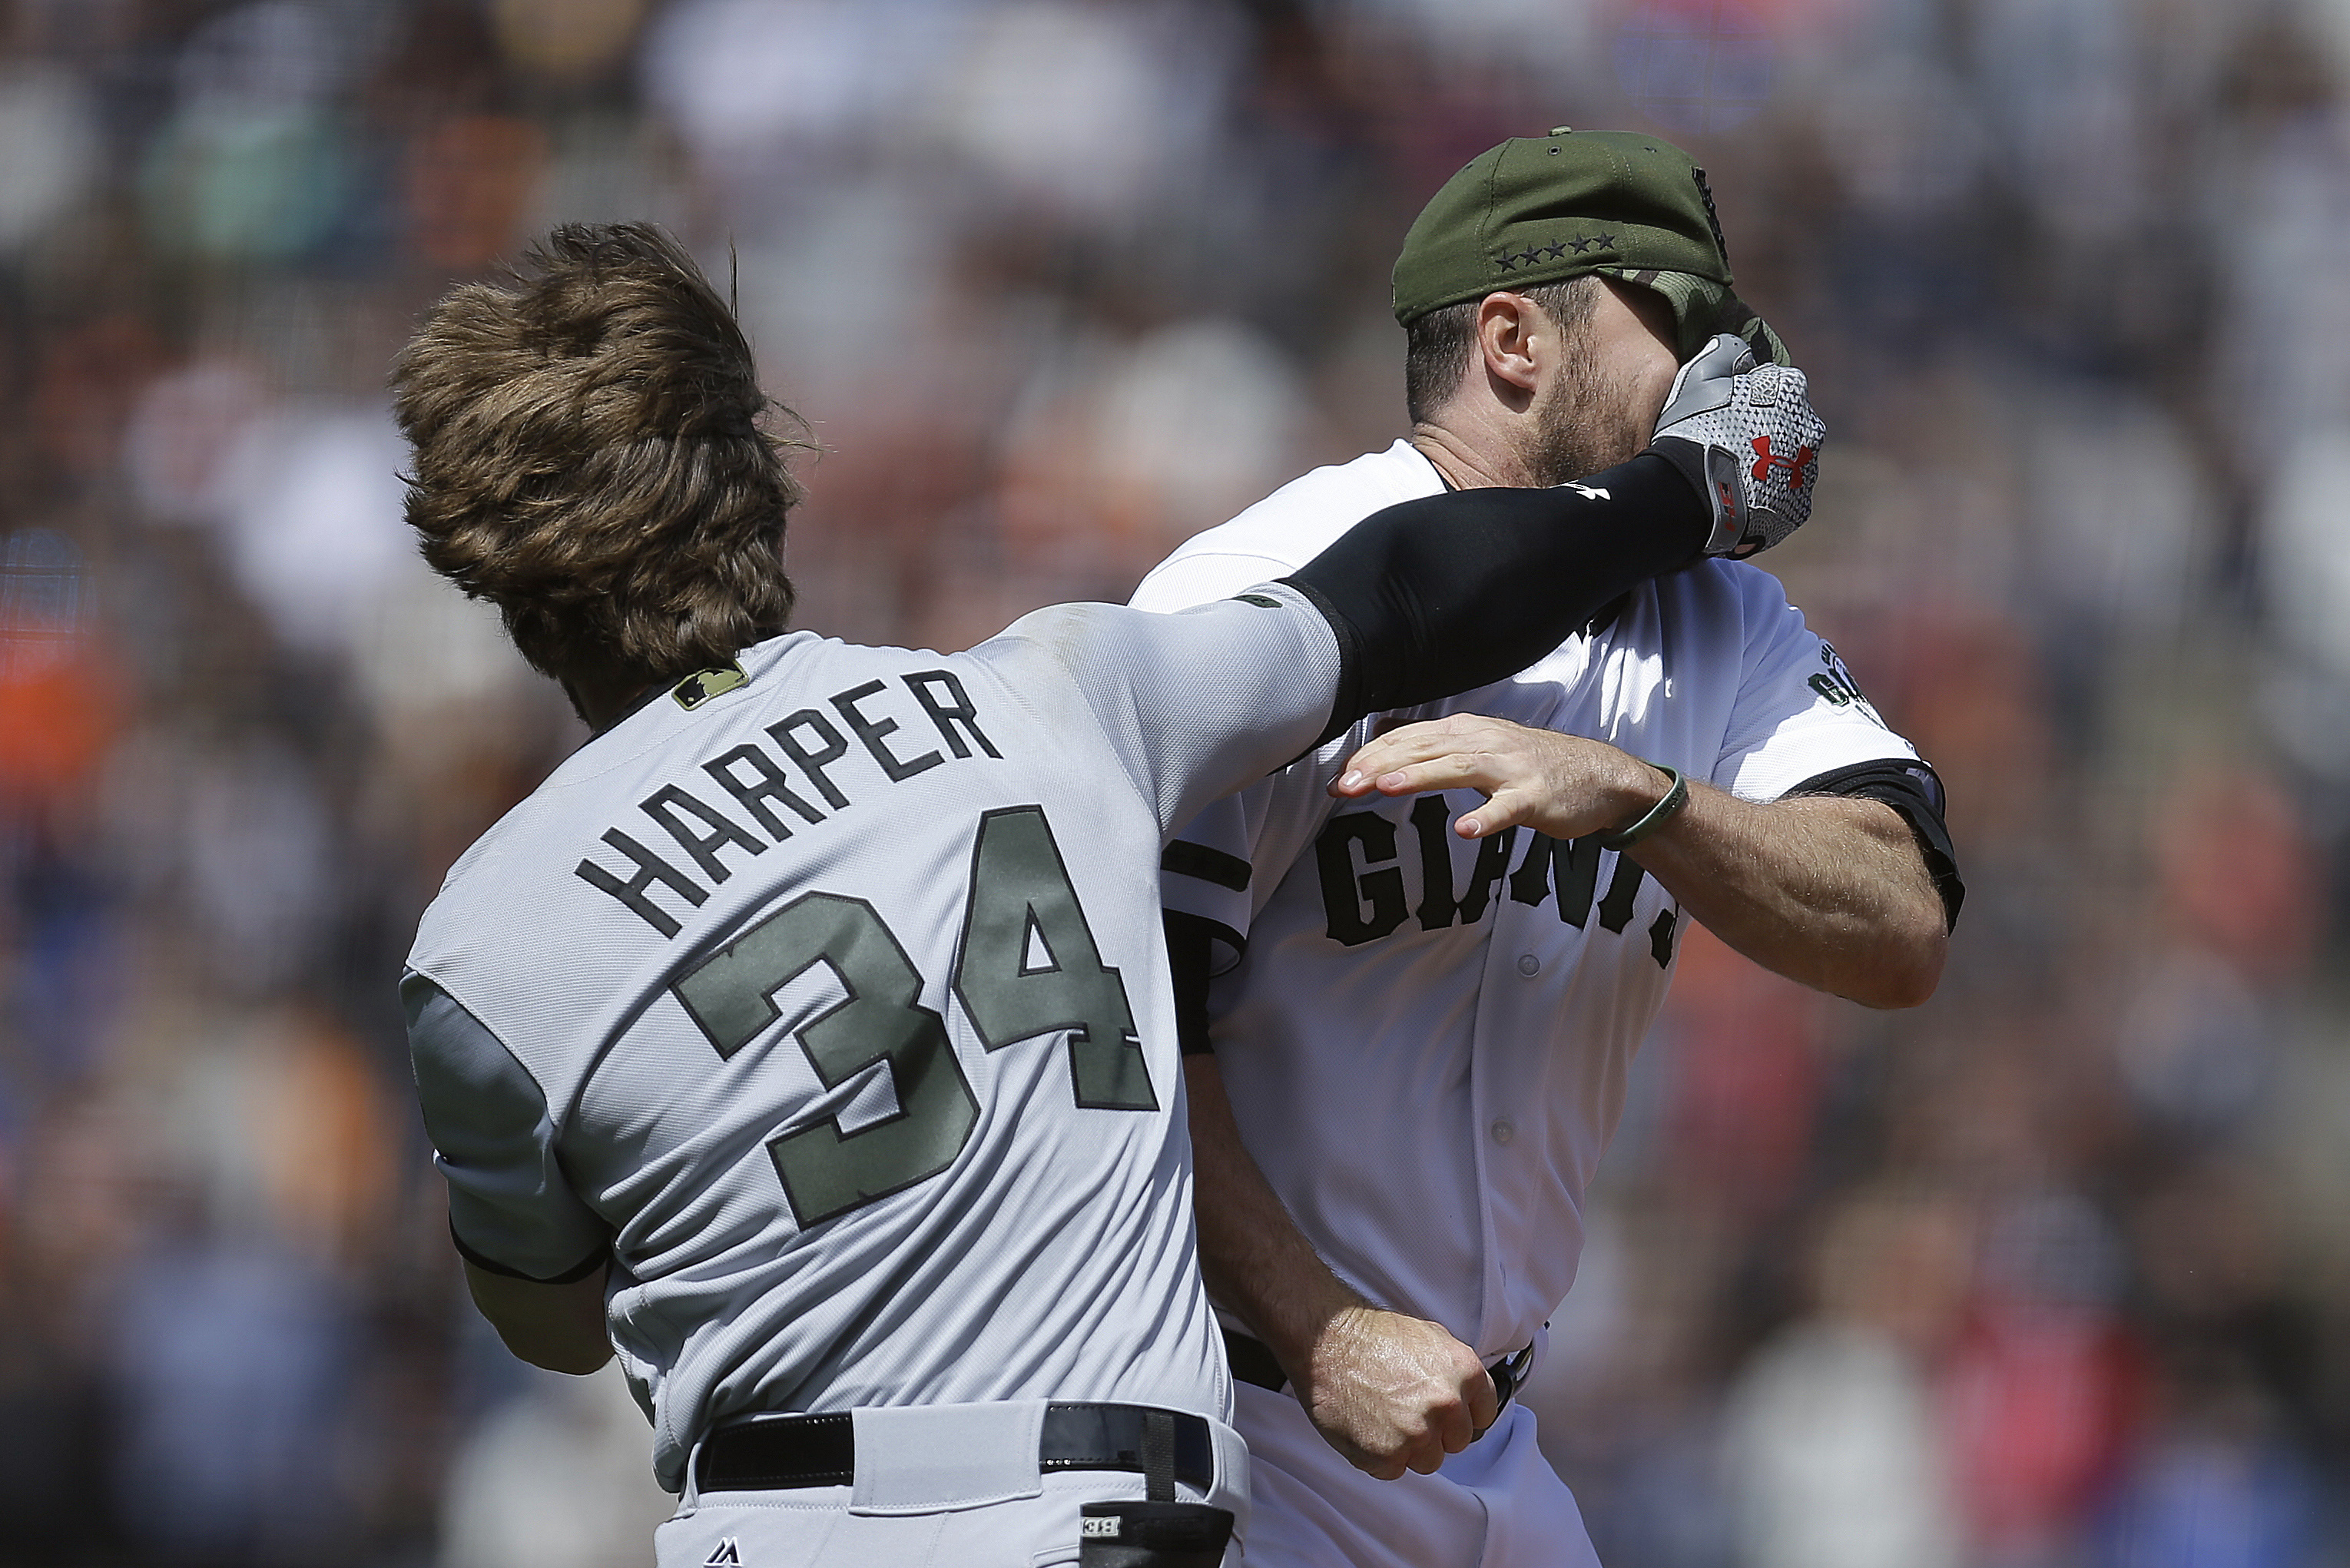 Bryce Harper continues tormenting Braves, with or without extra motivation